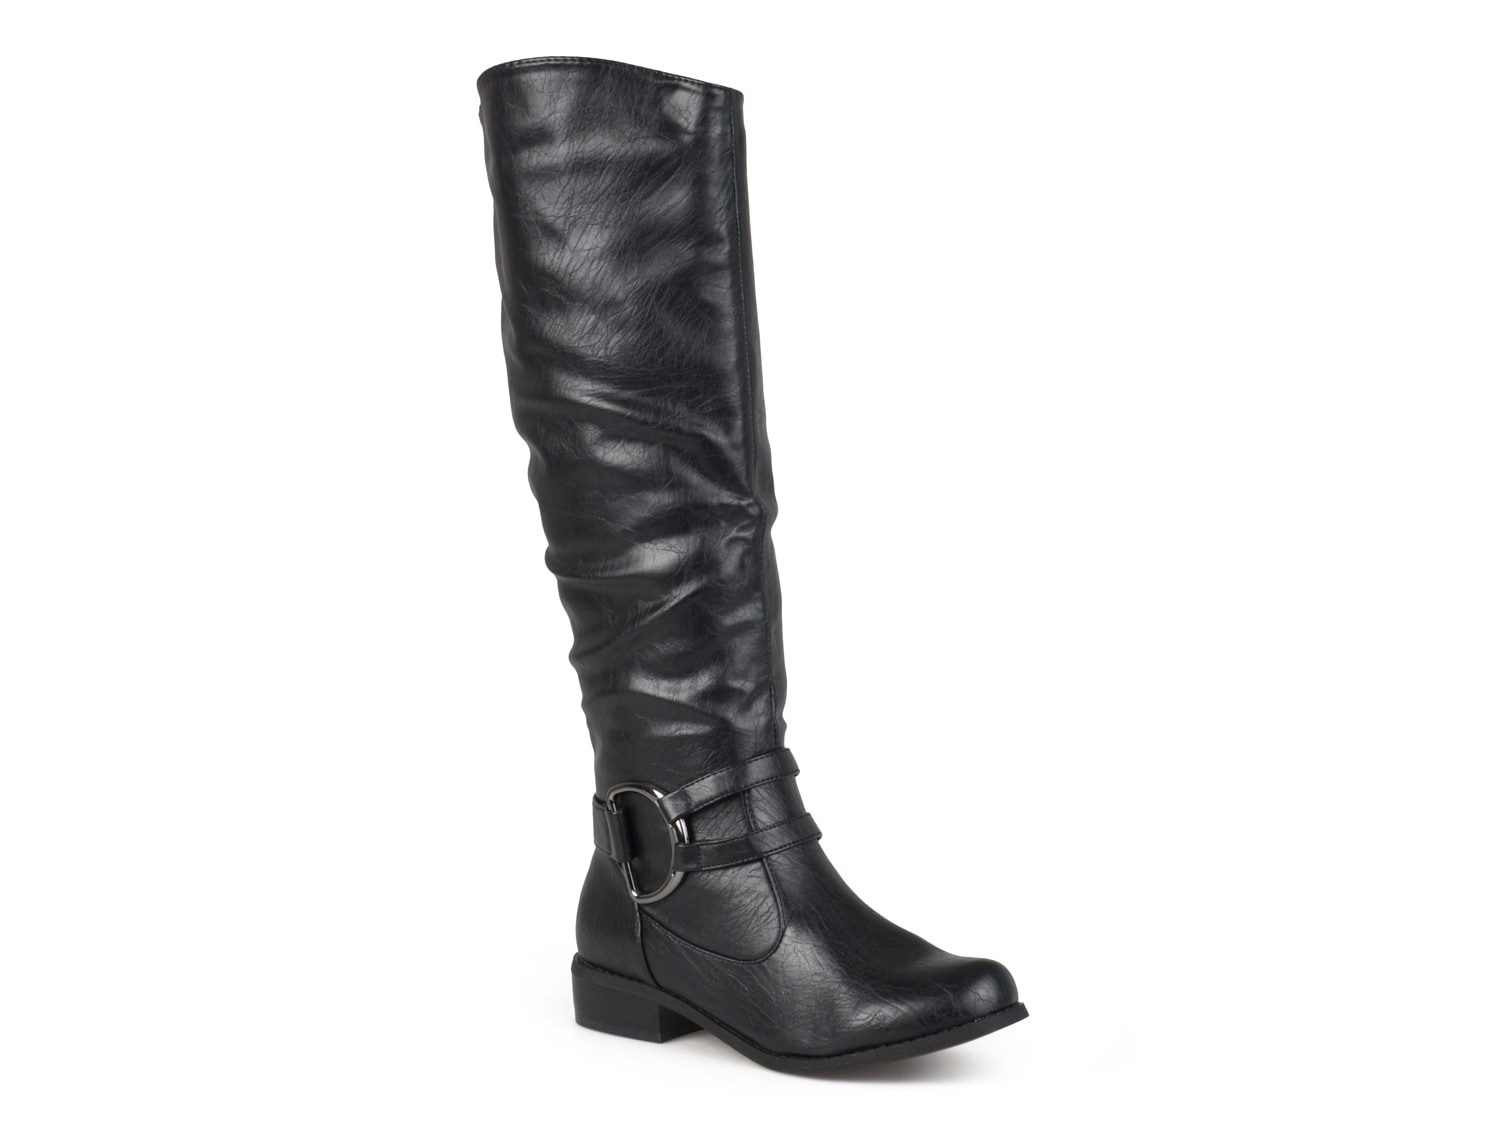 Journee Collection Charming-01 Wide Calf Riding Boot - Free Shipping | DSW